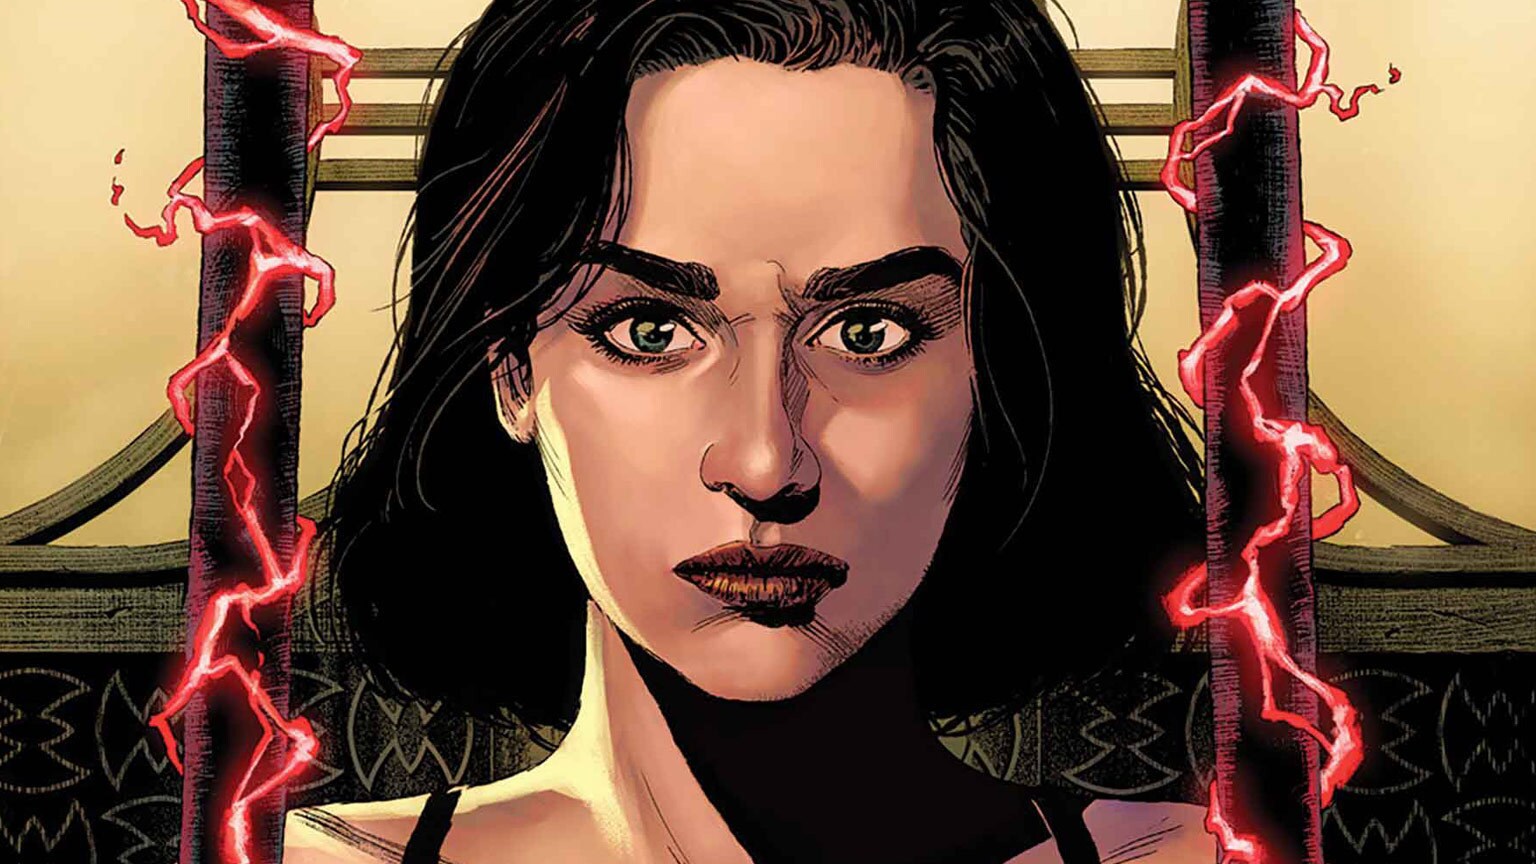 Qi’ra’s Story Continues in Crimson Reign, and More in Marvel’s December 2021 Star Wars Comics - Exclusive